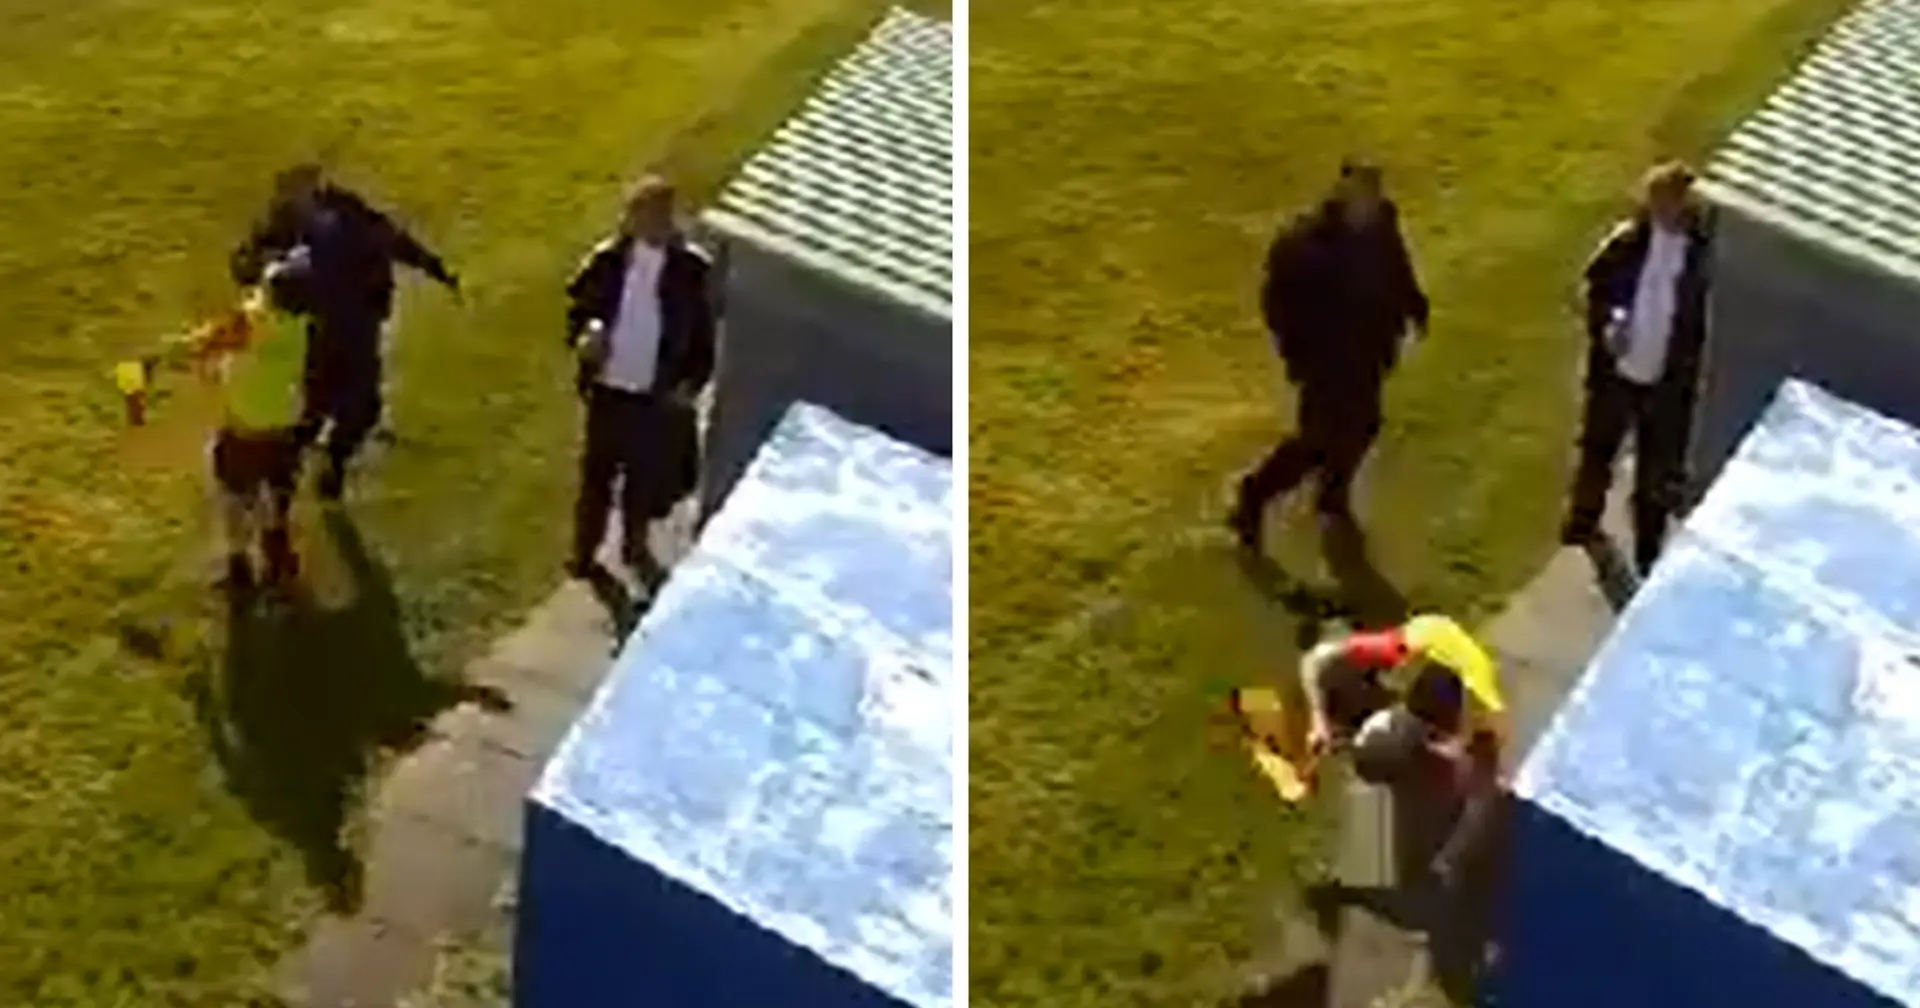 Man thought to be a football coach punches linesman in the face in shocking viral video